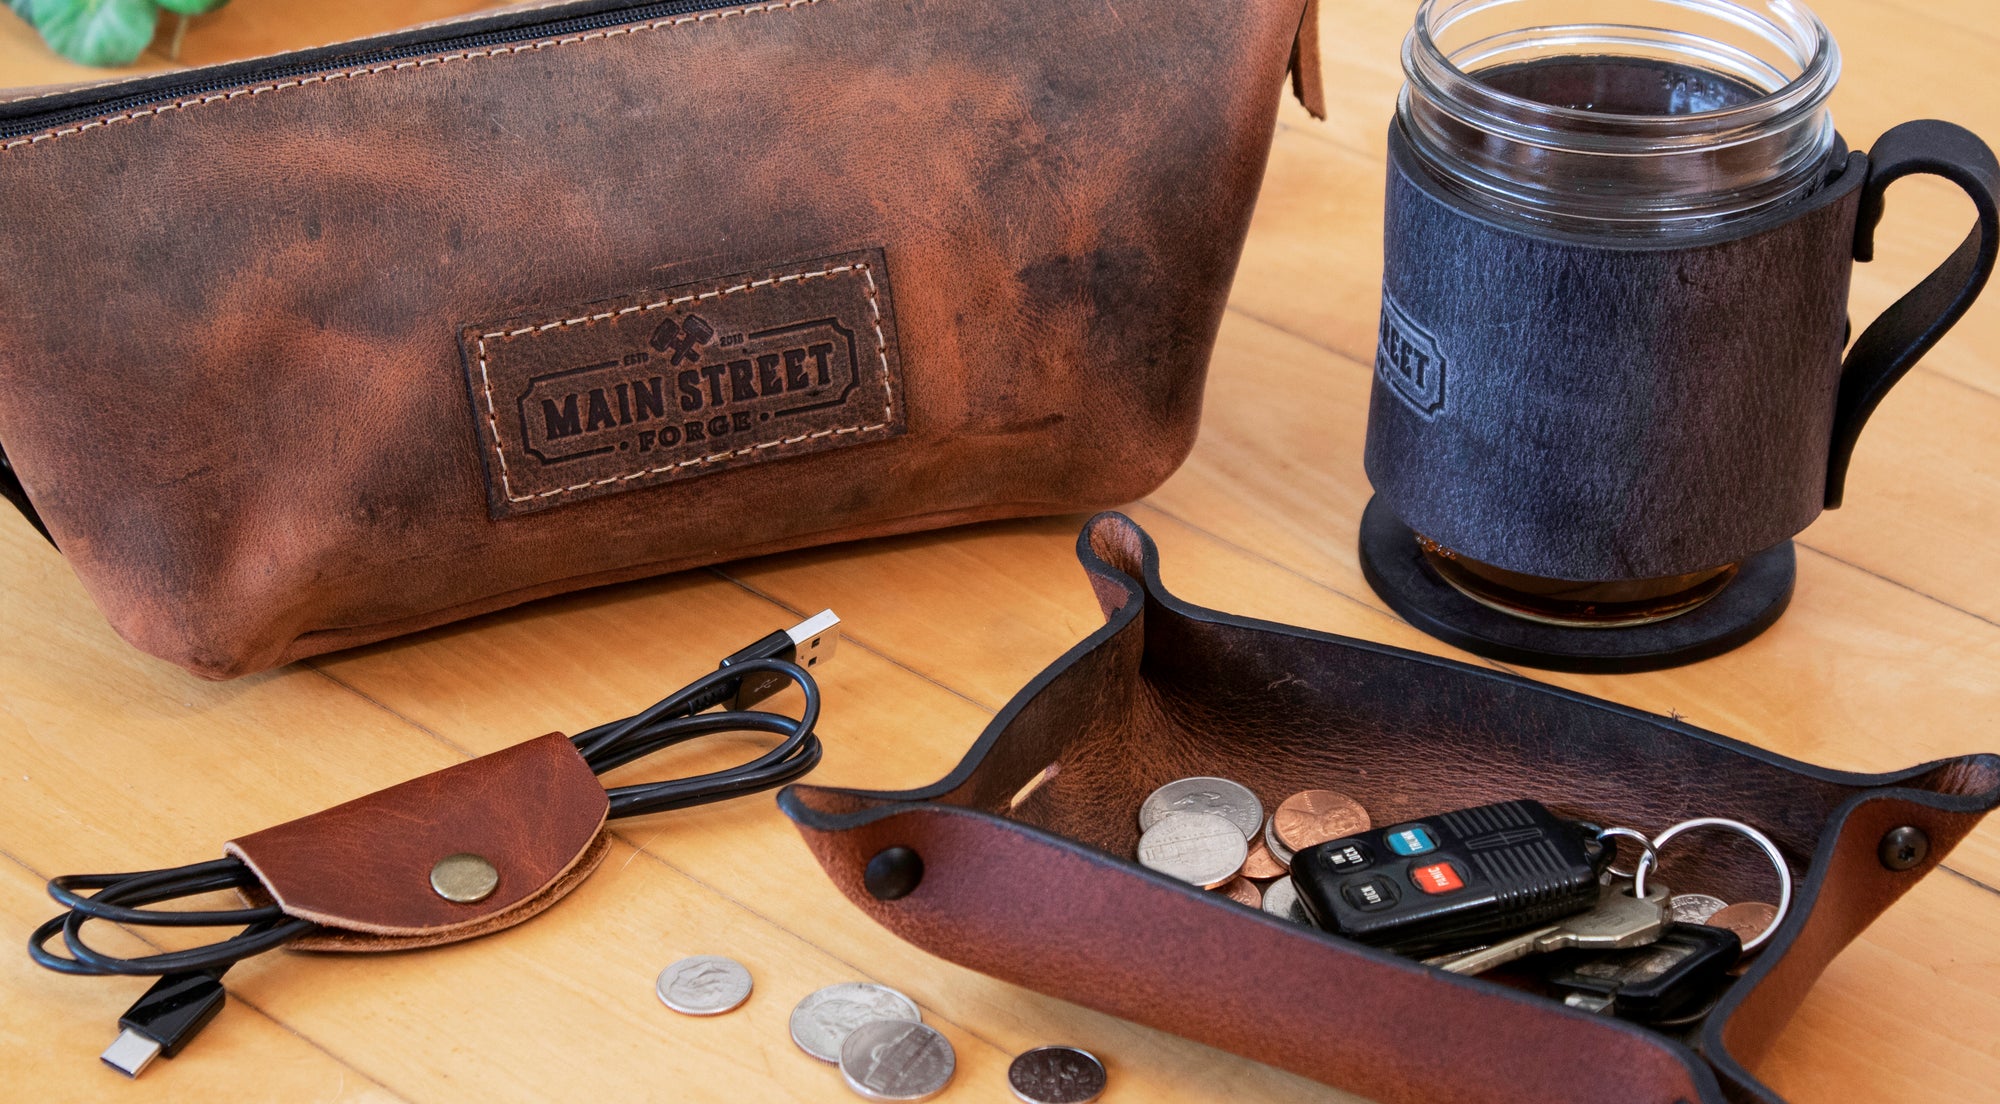 Leather Cord Wraps / Cable Organizers - Main Street Forge